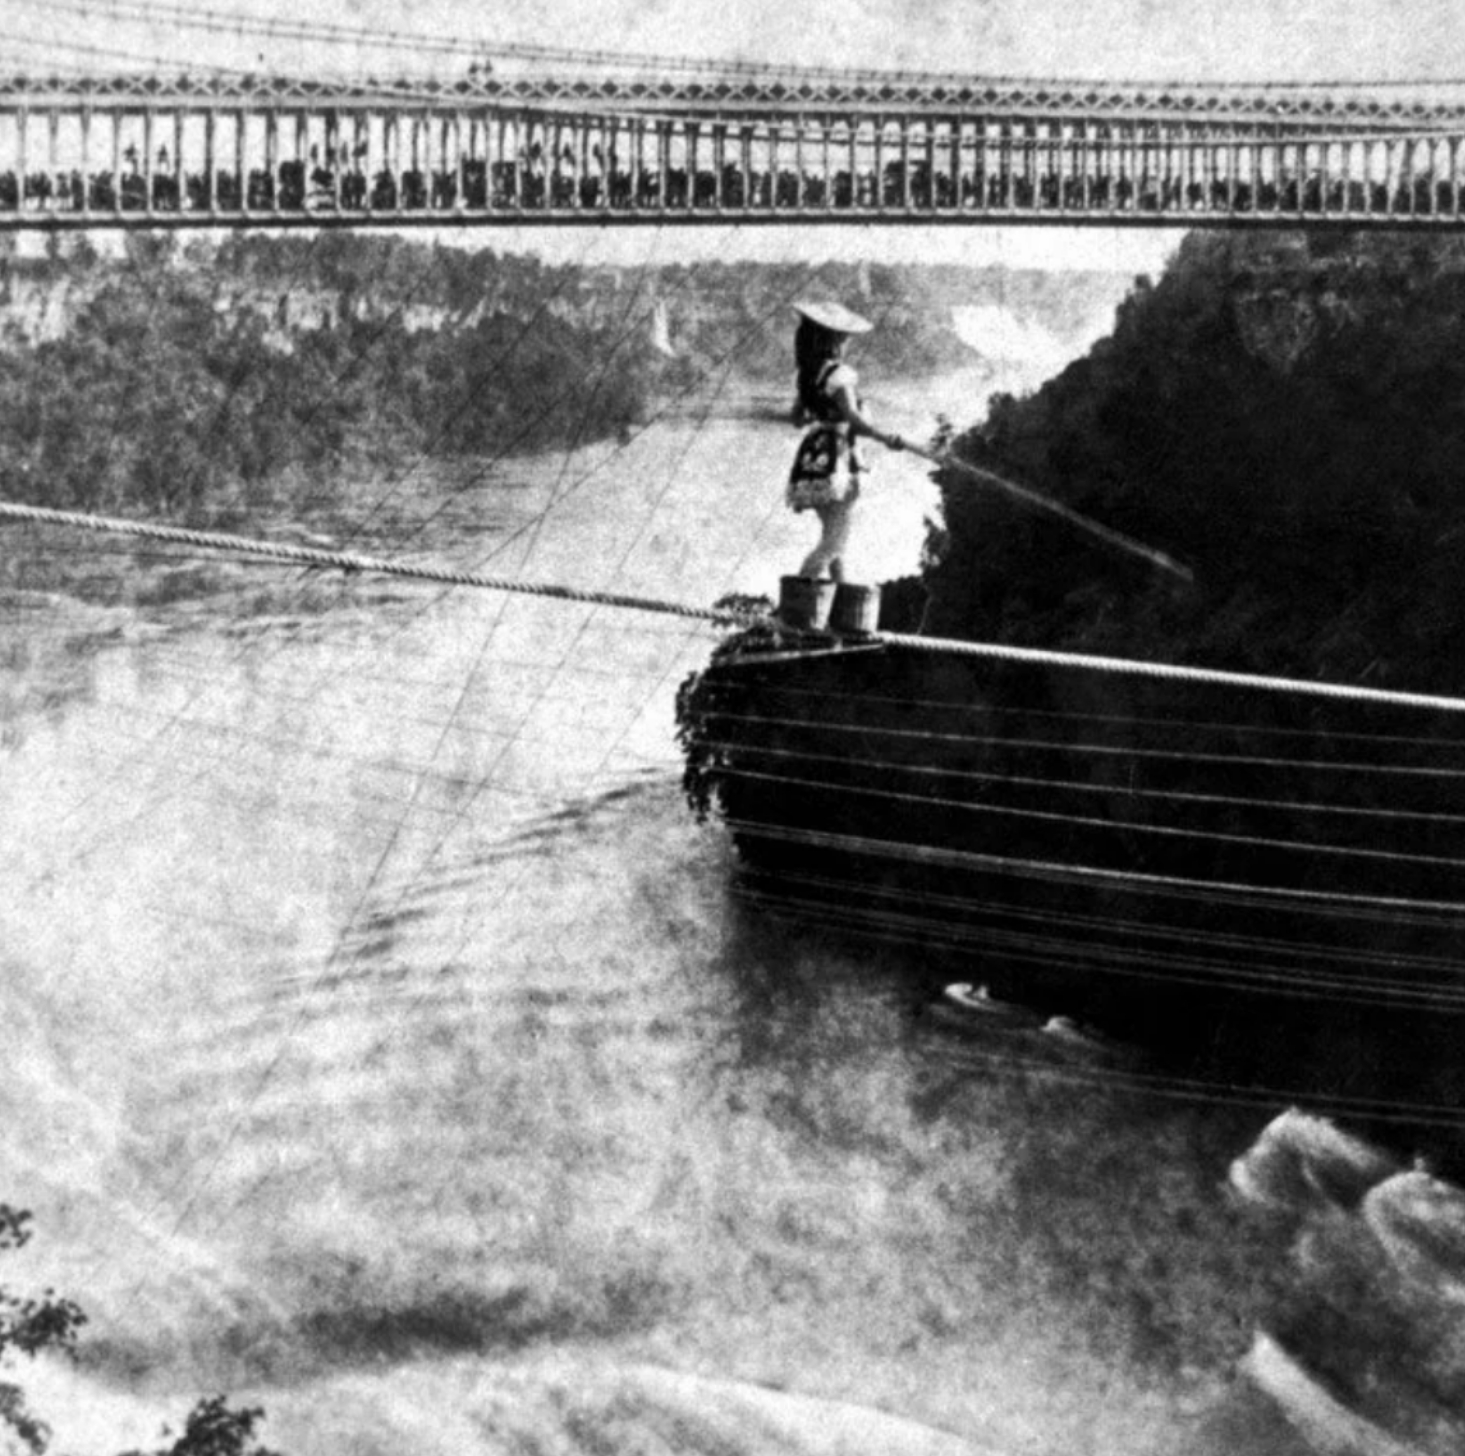 Maria Spelterini crossing the Niagara gorge on a tightrope with peach baskets on her feet in 1876.jpg